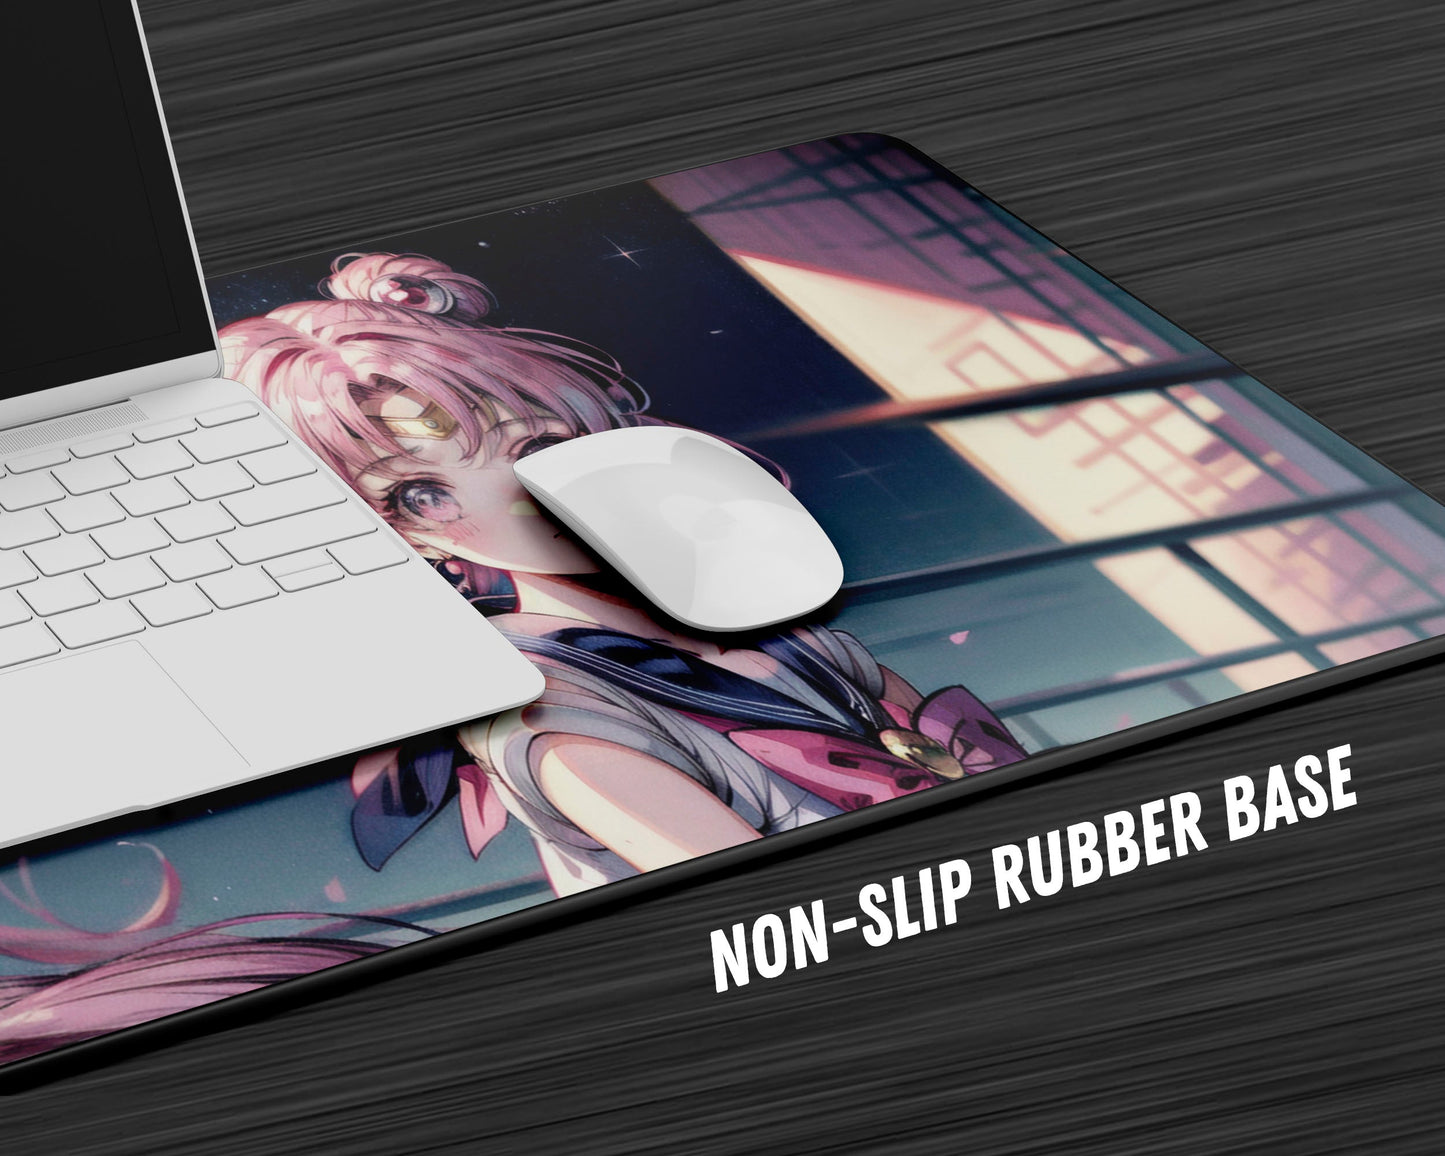 Anime Town Creations Mouse Pad Sailor Moon Girl Pastel Gaming Mouse Pad Accessories - Anime Sailor Moon Gaming Mouse Pad